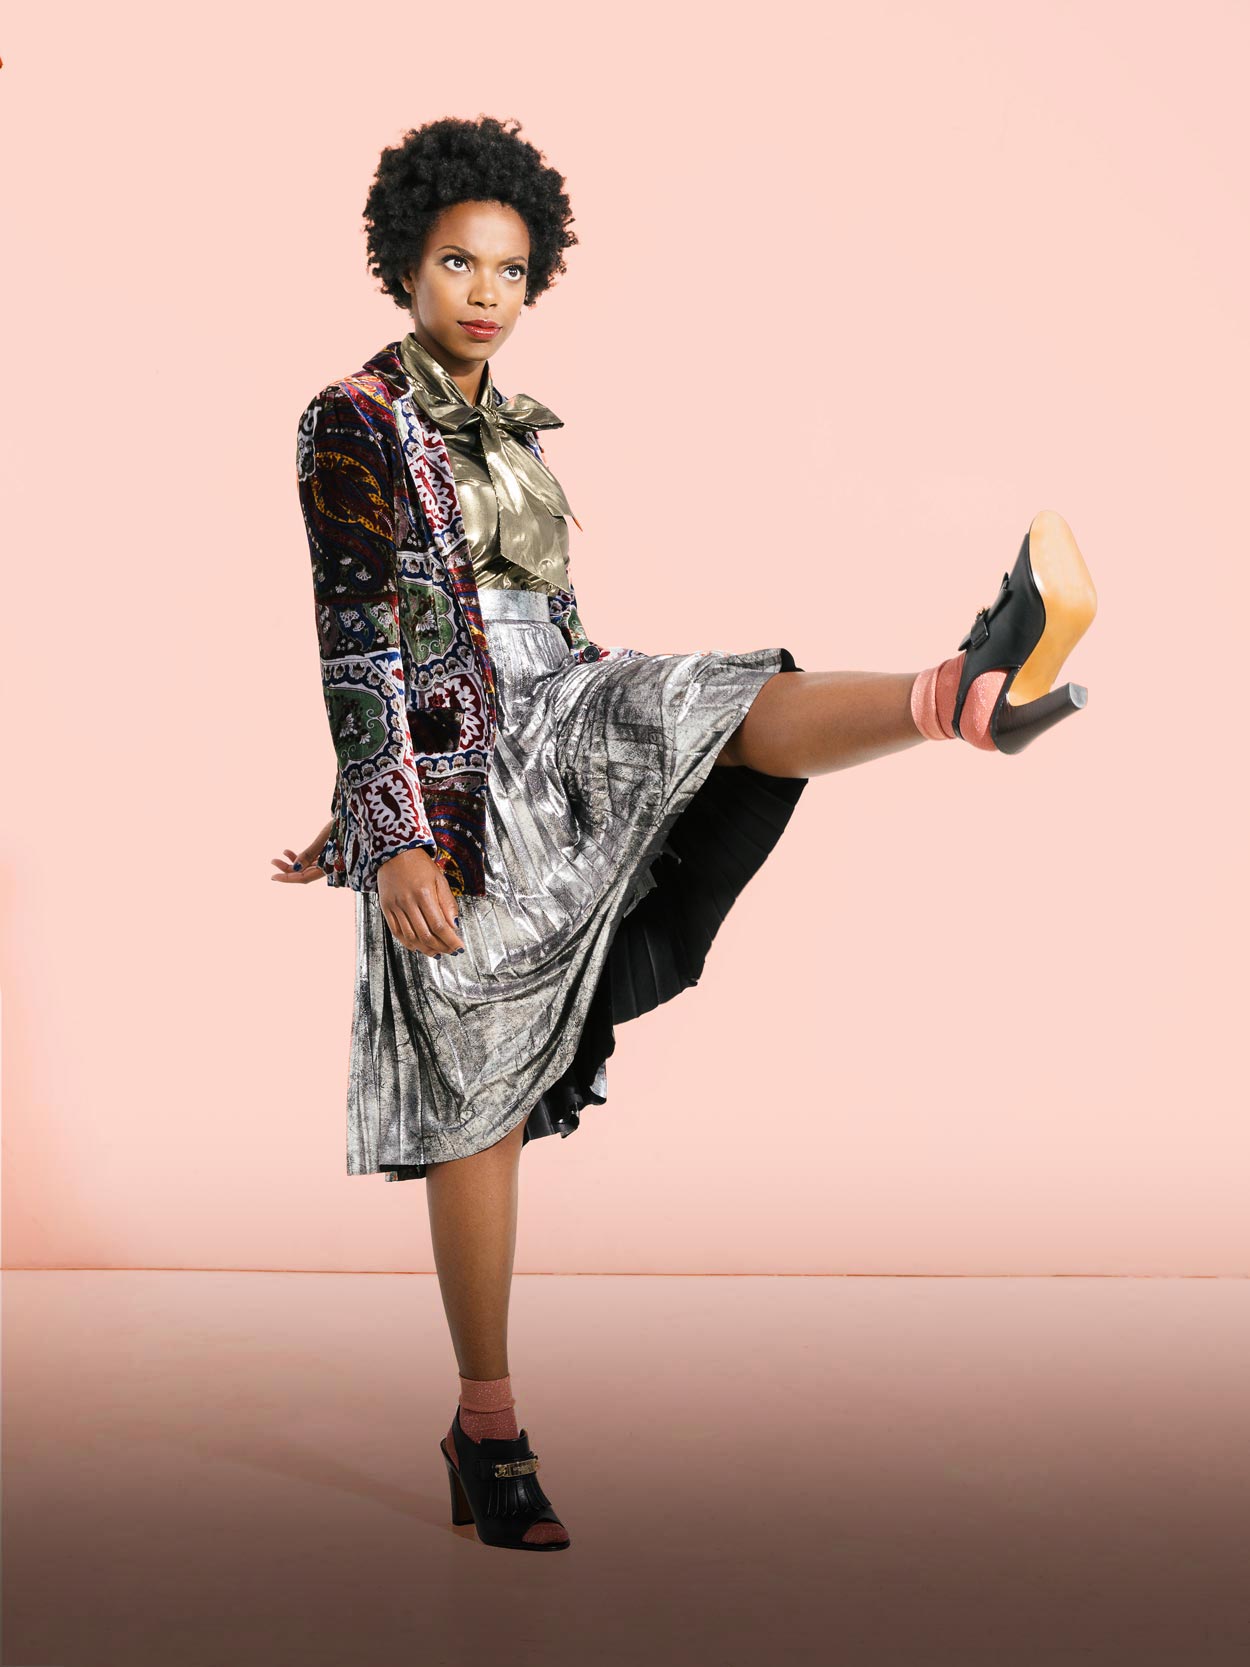 Sasheer Zamata stands on one leg with the other high in the air